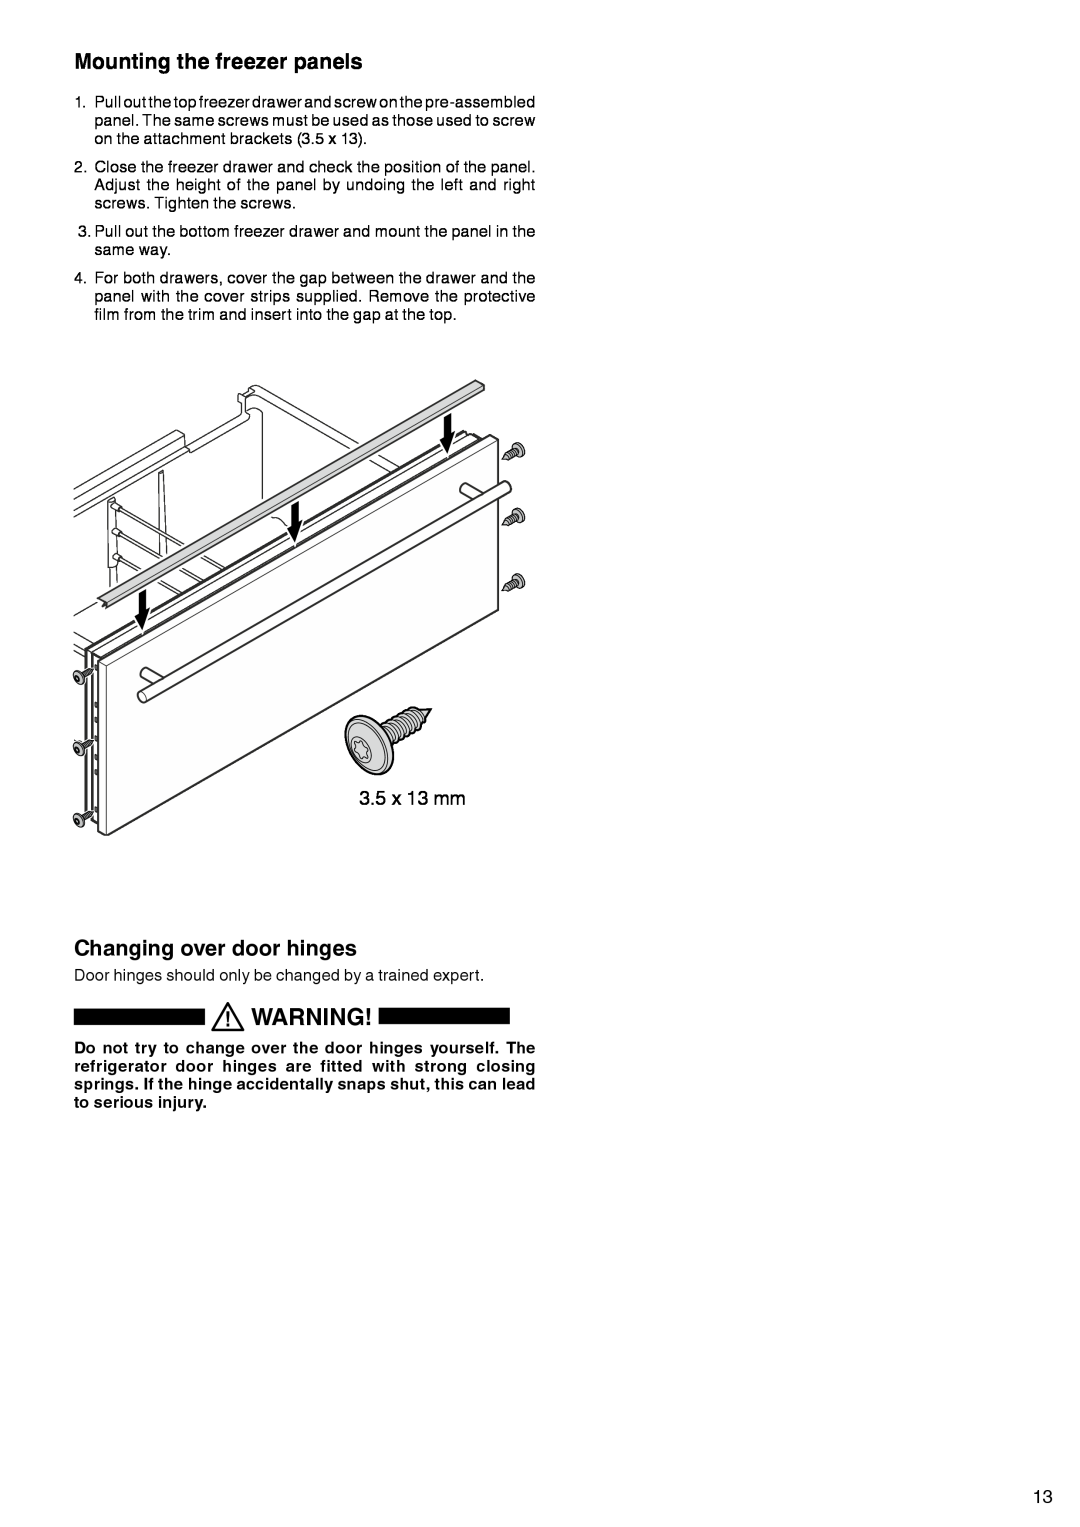 Liebherr 7083 461-00 manual Mounting the freezer panels, Changing over door hinges, 3.5 x 13 mm 